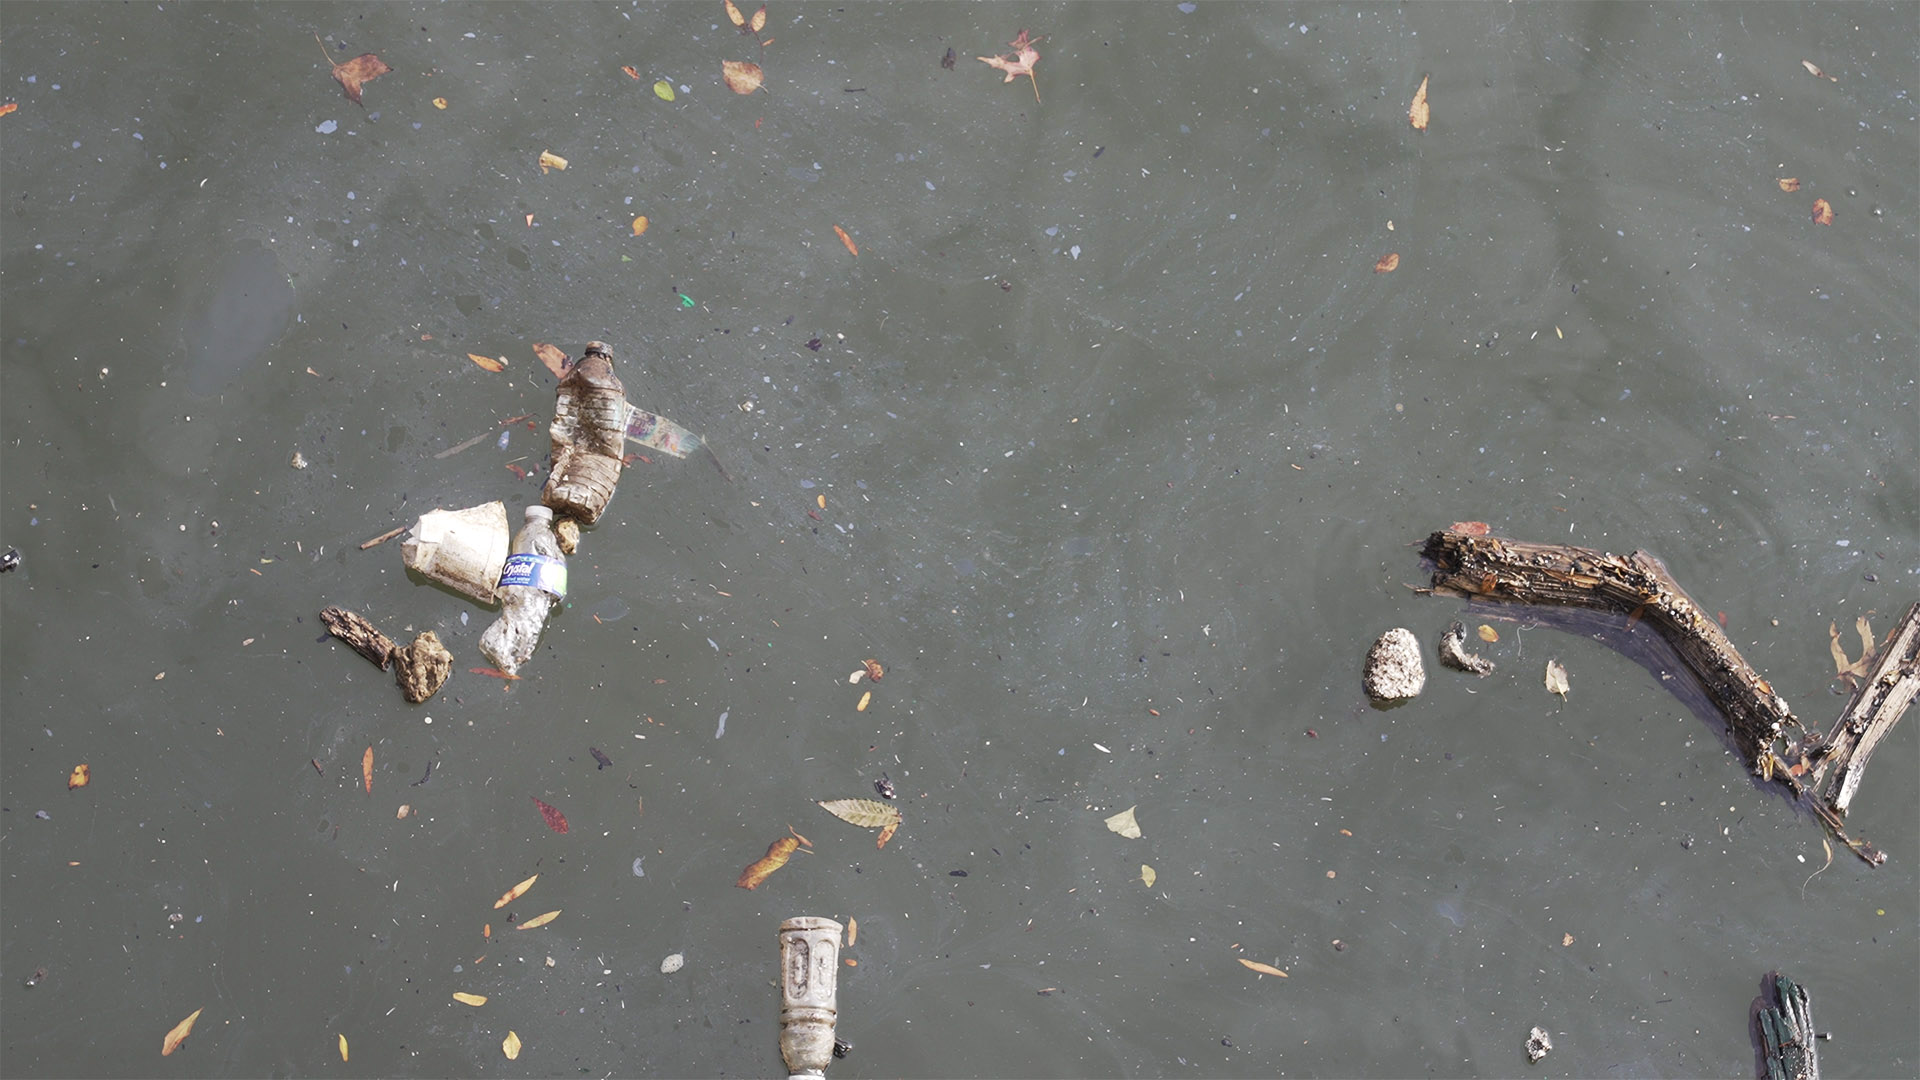 Although the EPA has cleaned up the Gowanus Canal, coal tar, garbages, and leaves can also be seen on the water.